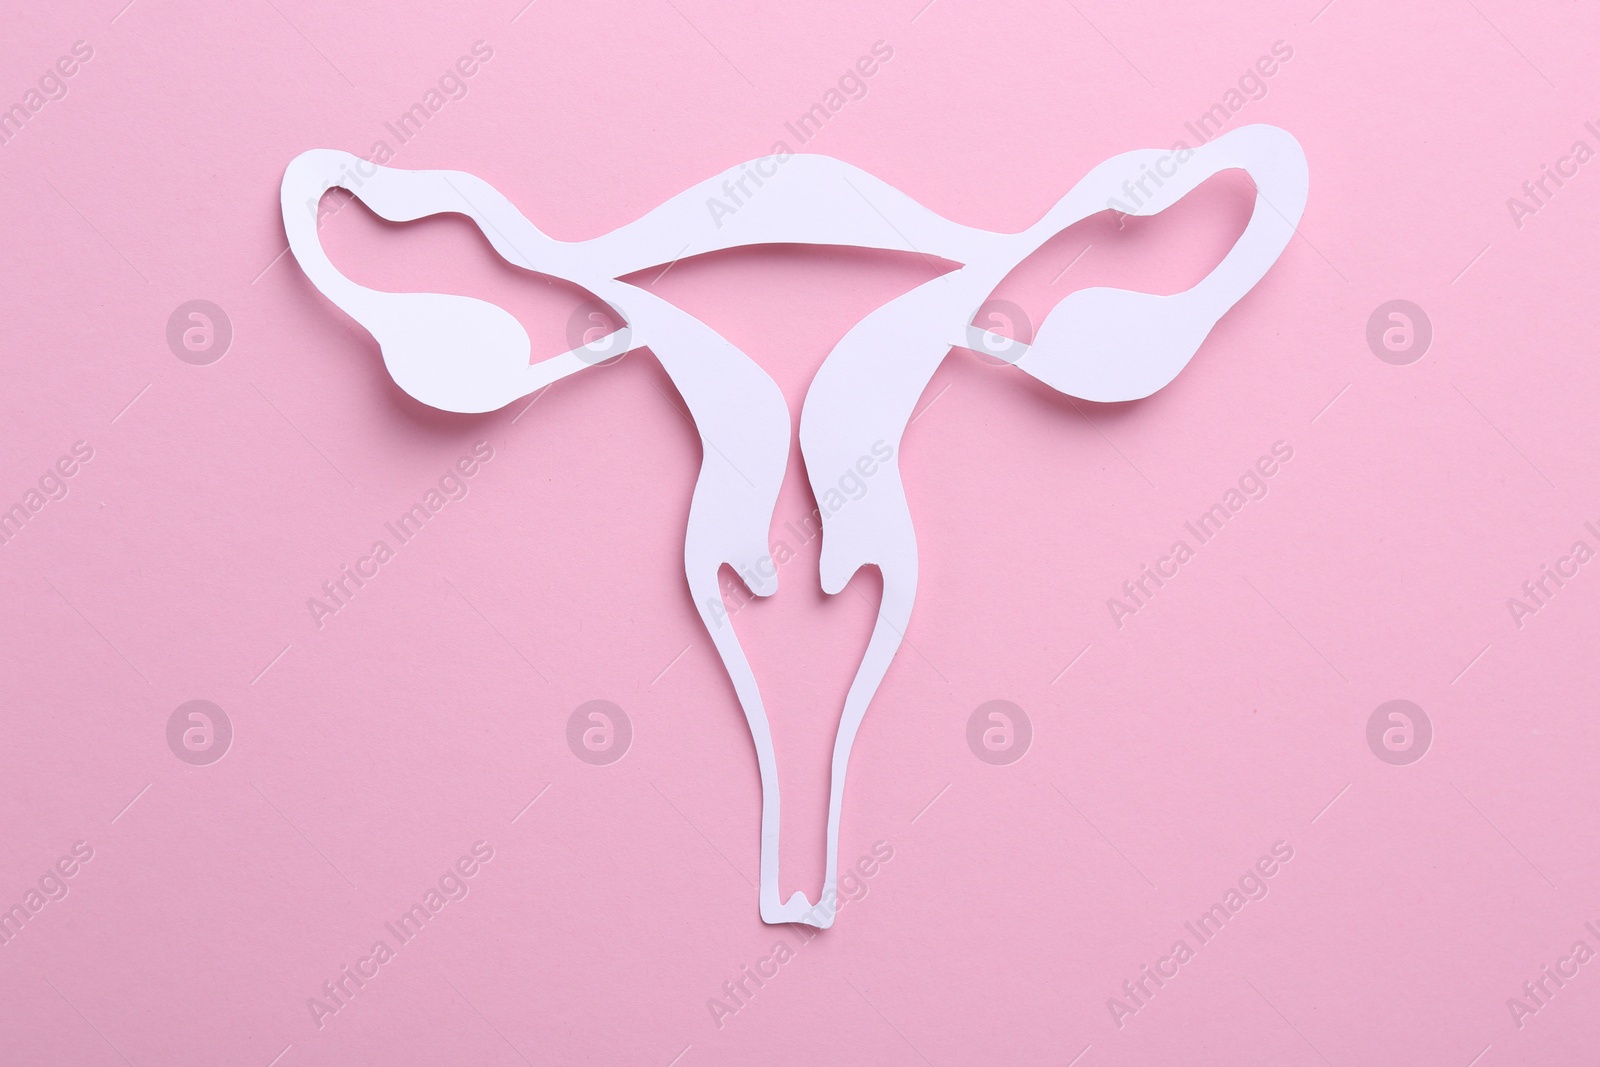 Photo of Reproductive medicine. Paper uterus on pink background, top view